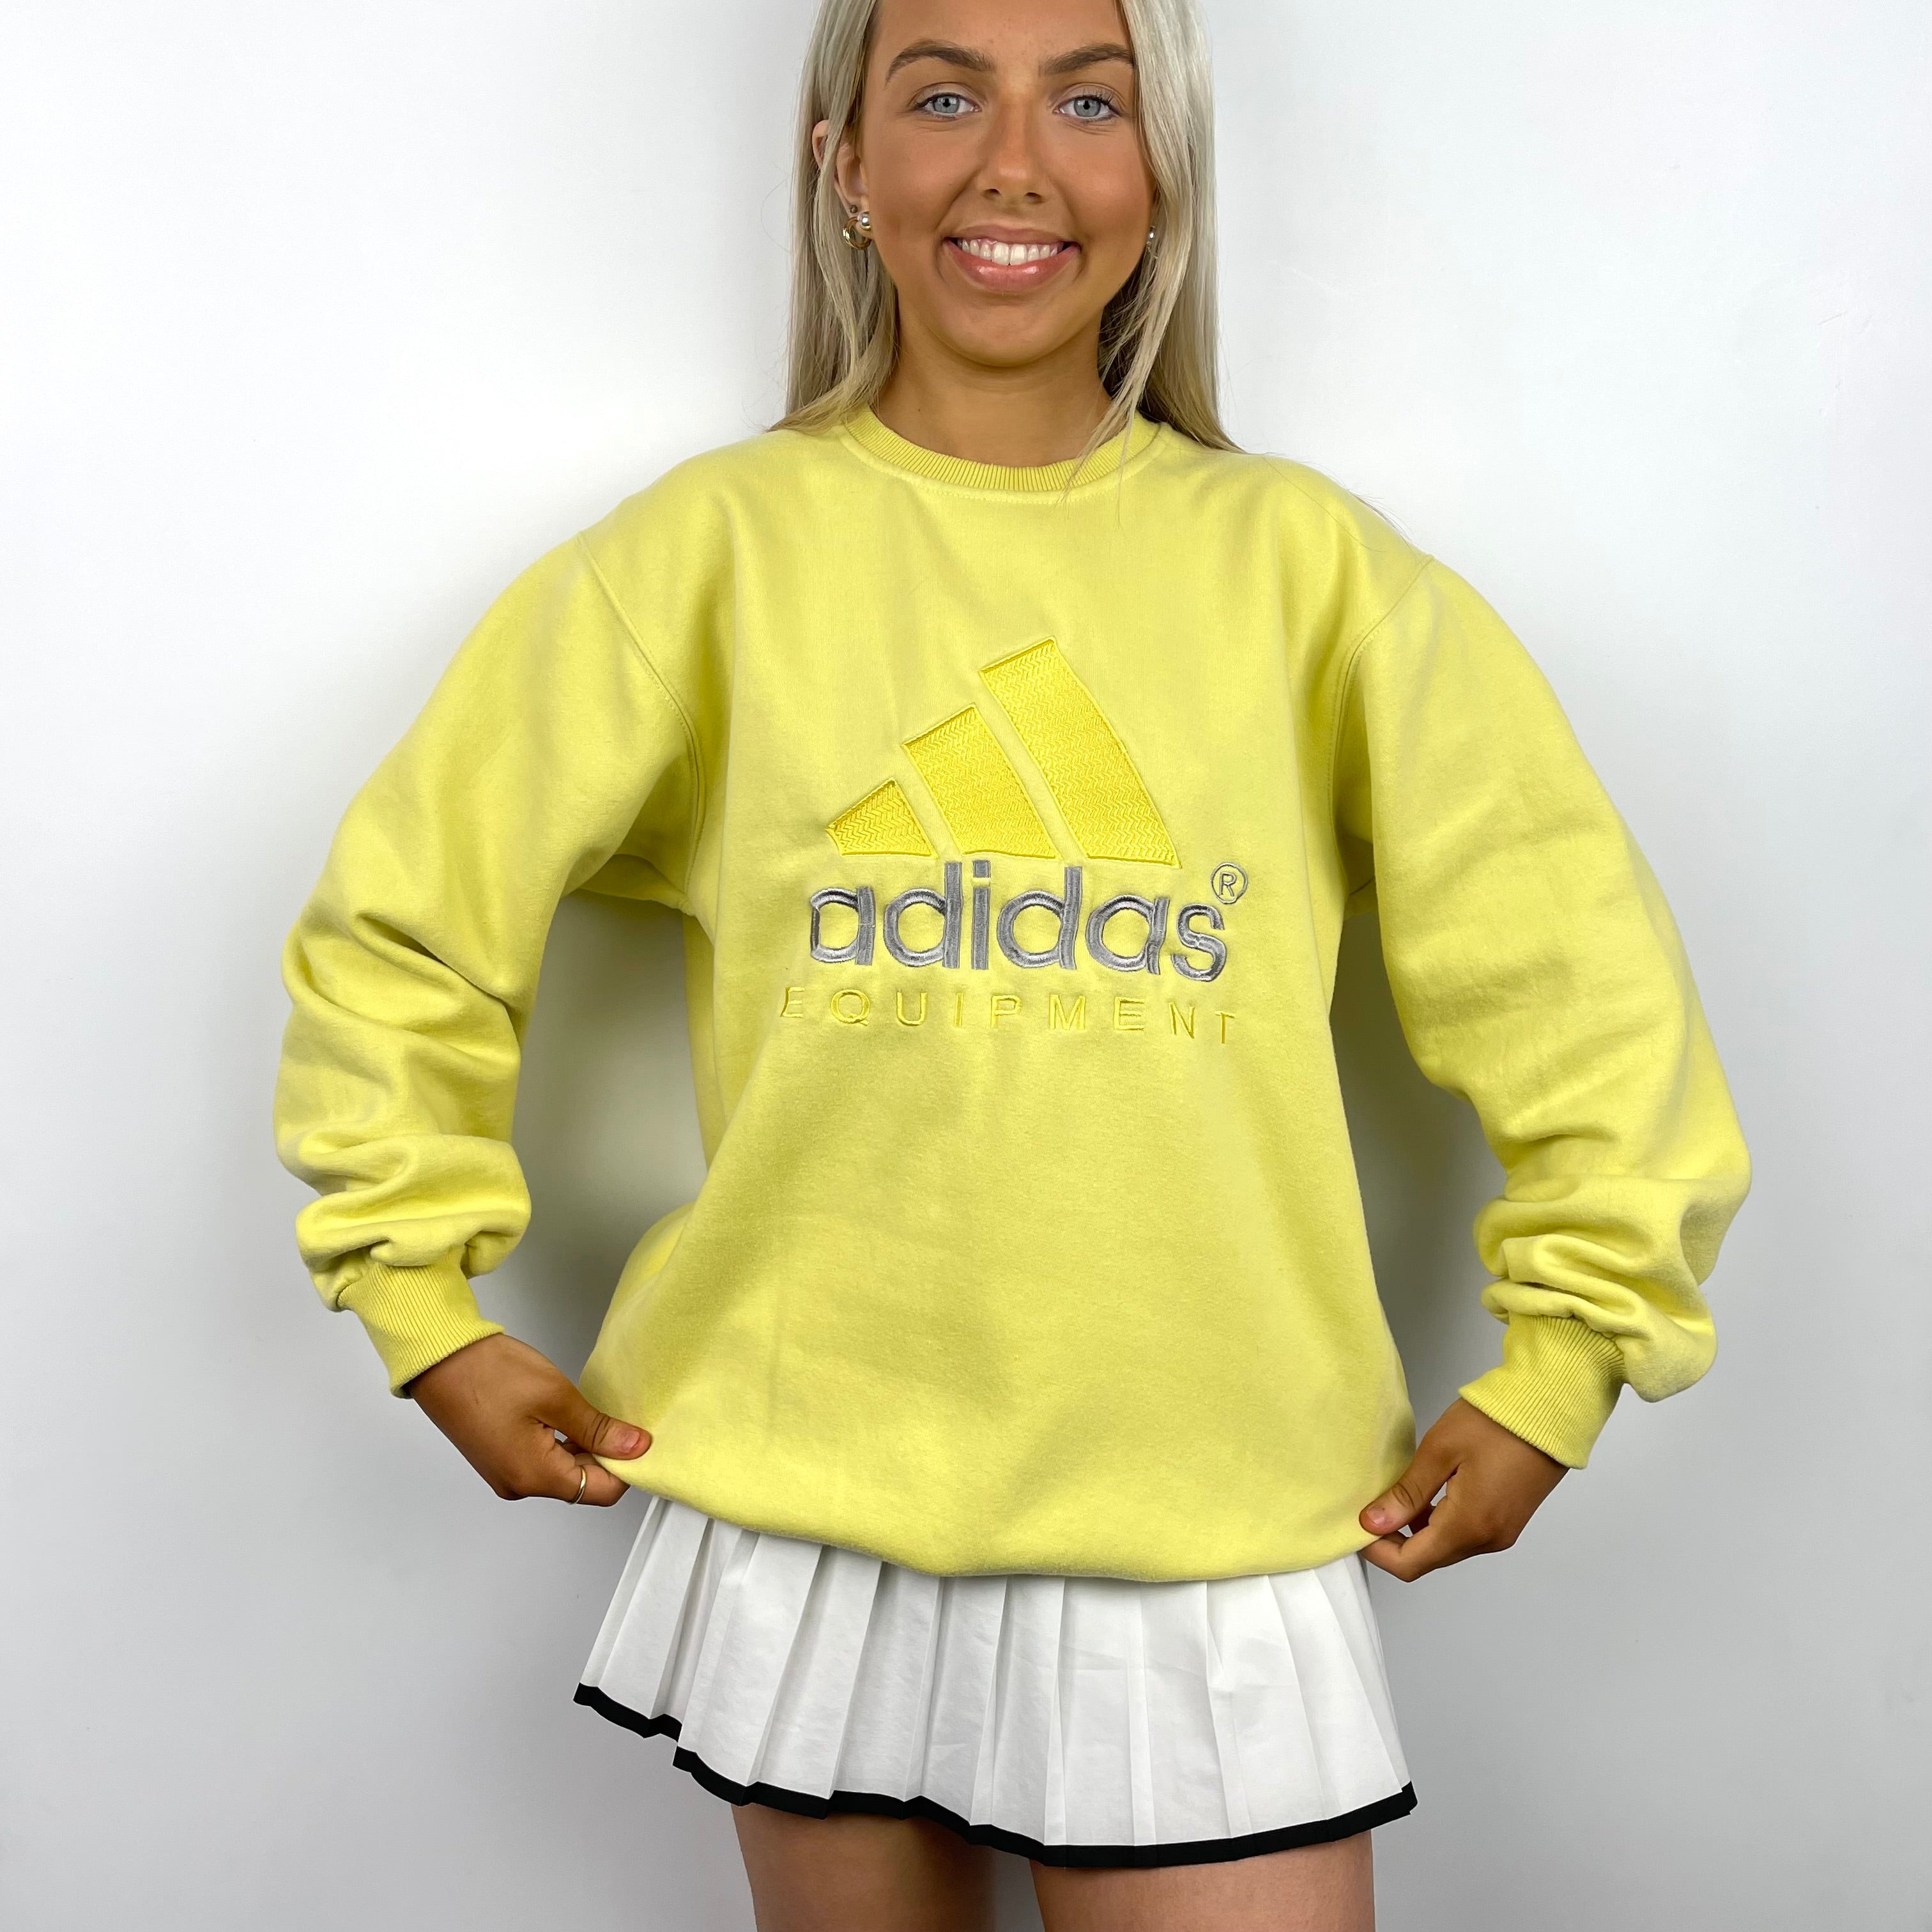 Adidas RARE Yellow Embroidered Spell Out Sweatshirt Jamie Online Vintage